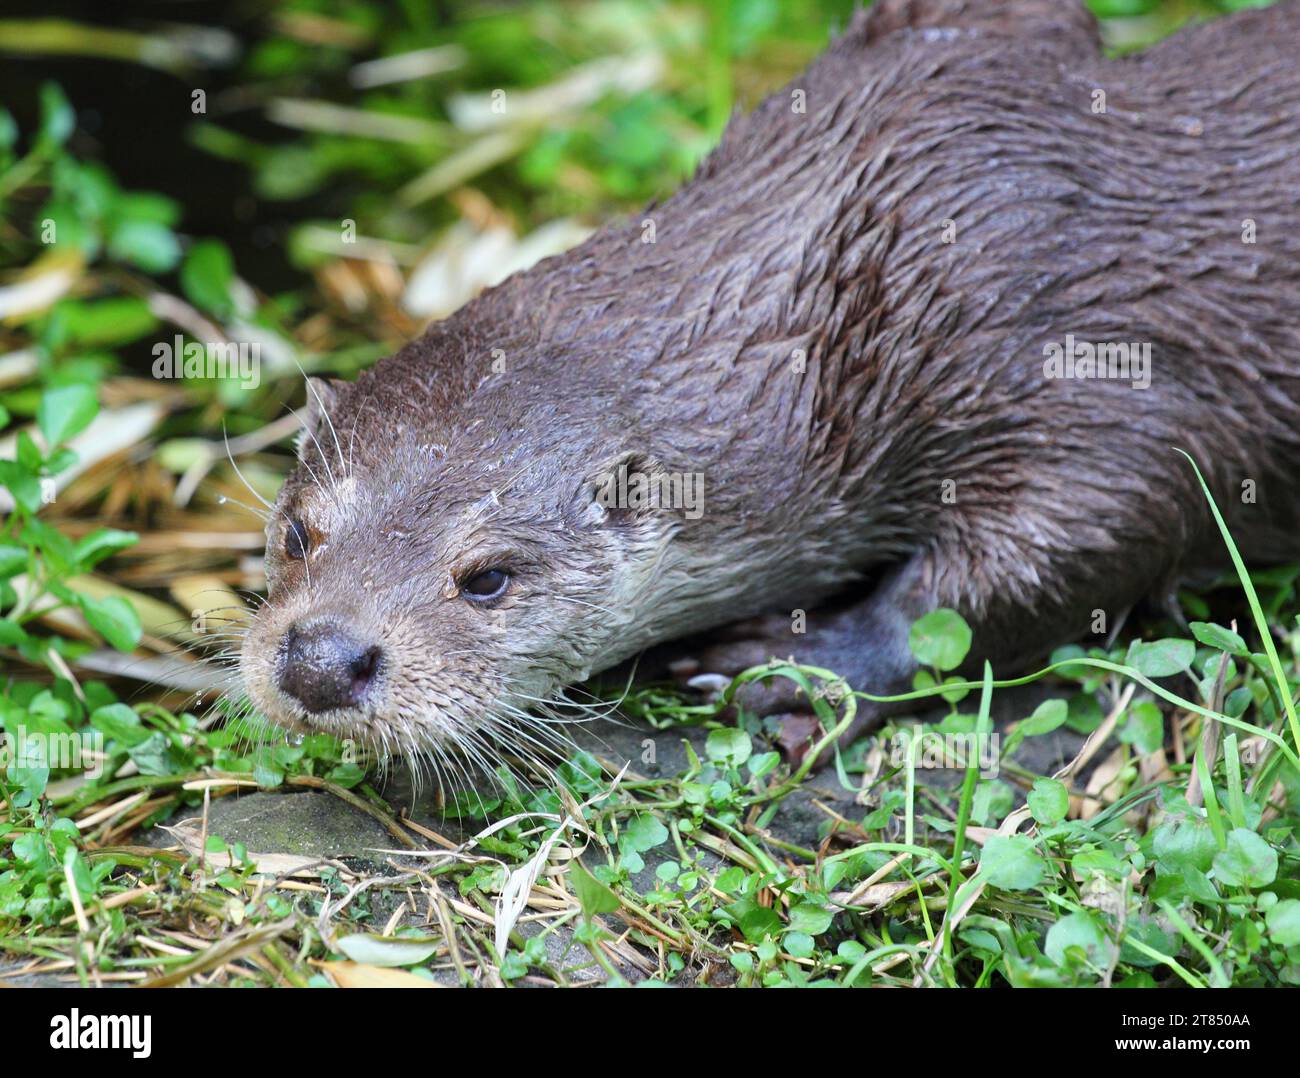 The Eurasian otter (Lutra lutra), also known as the European otter, Eurasian river otter, common otter, and Old World otter, is a semiaquatic mammal n Stock Photo